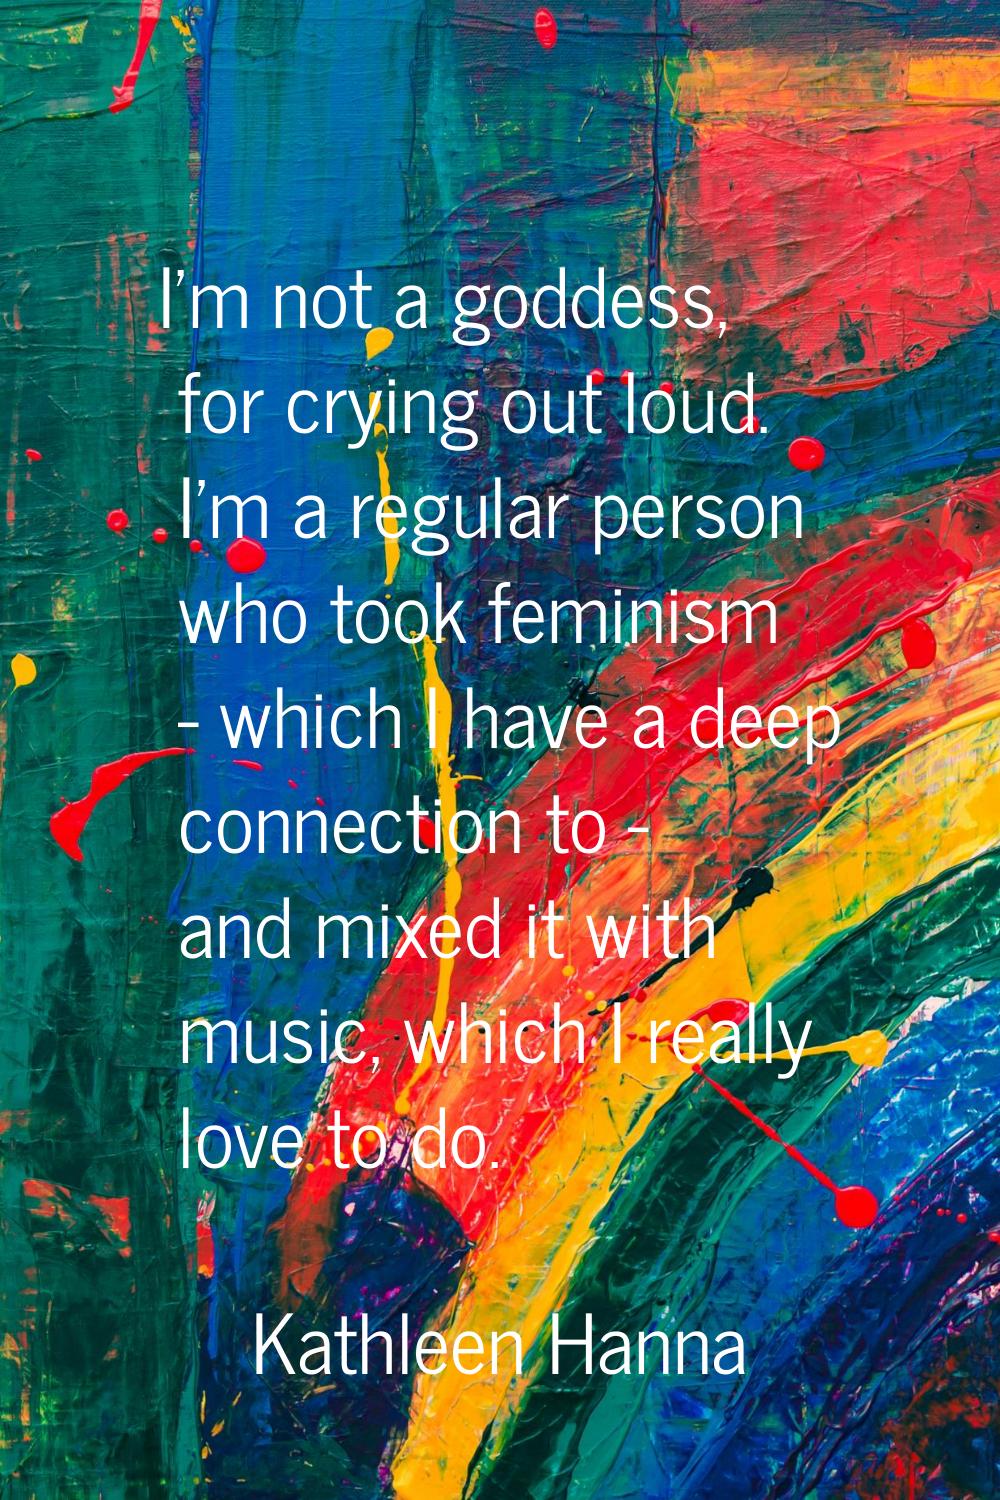 I'm not a goddess, for crying out loud. I'm a regular person who took feminism - which I have a dee